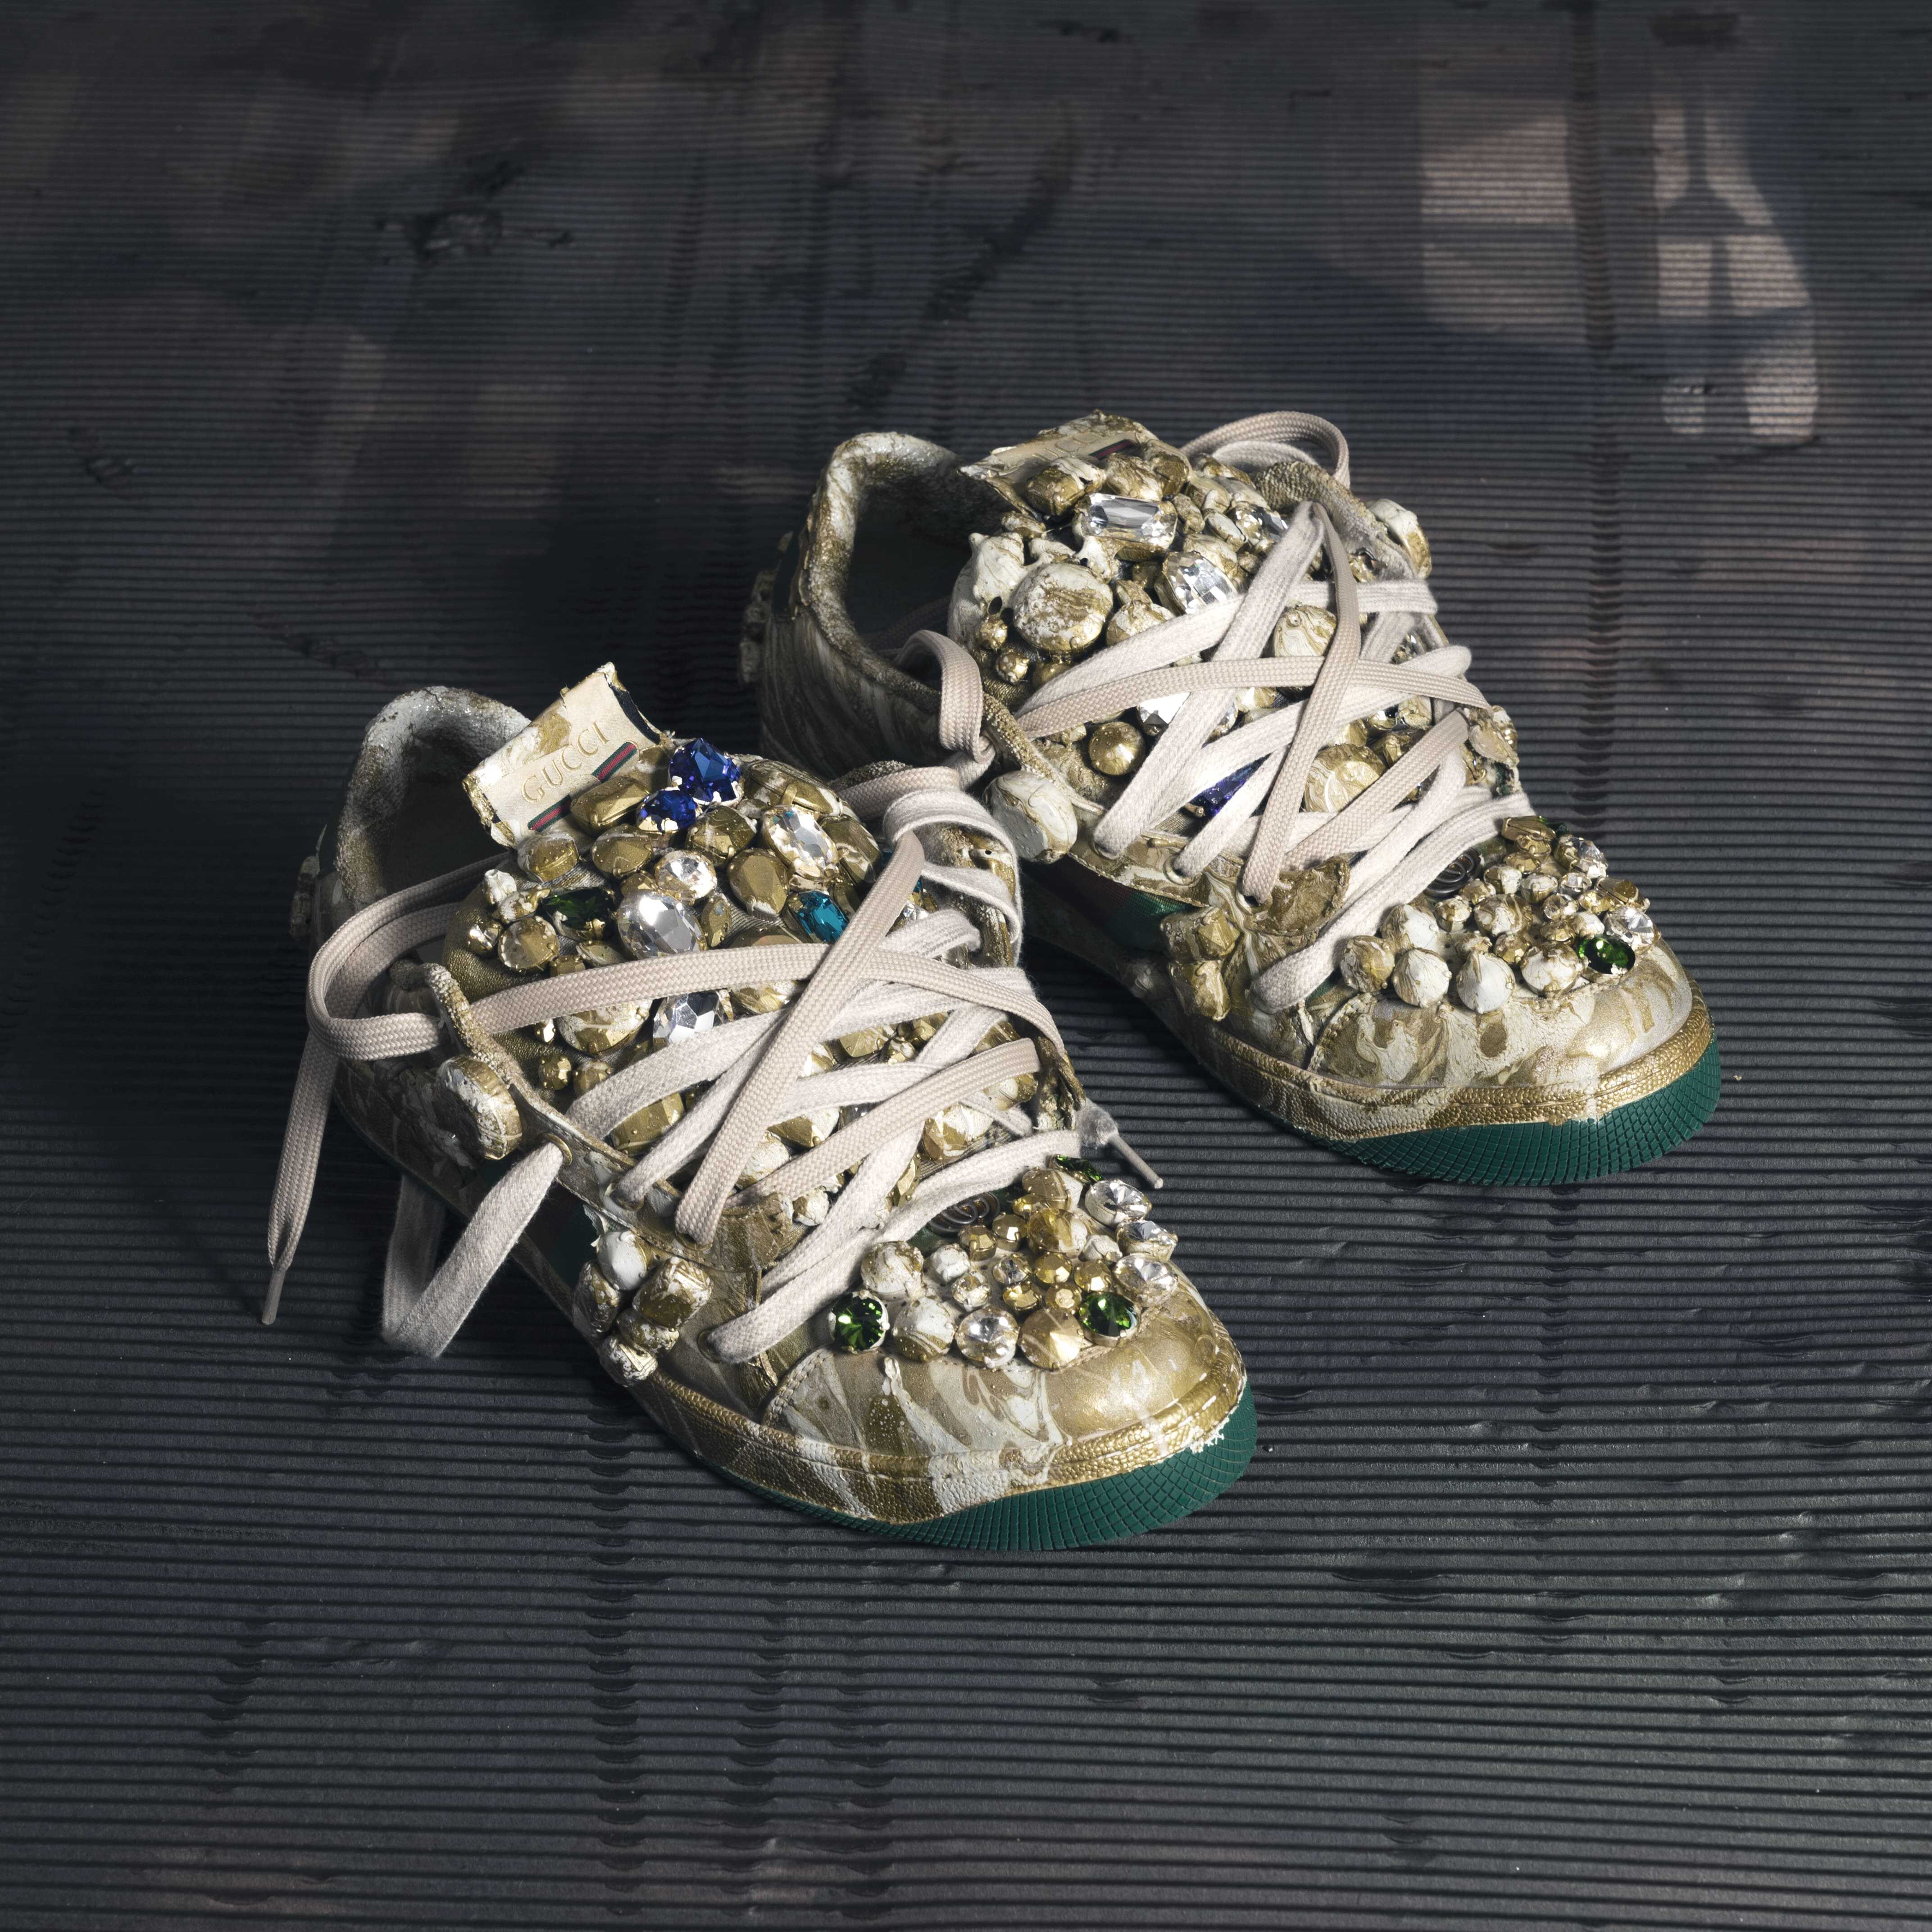 STILL_STREET_2.jpg image from GUCCI SNEAKER GARAGE RAL7000STUDIO project created on 2020-03-01